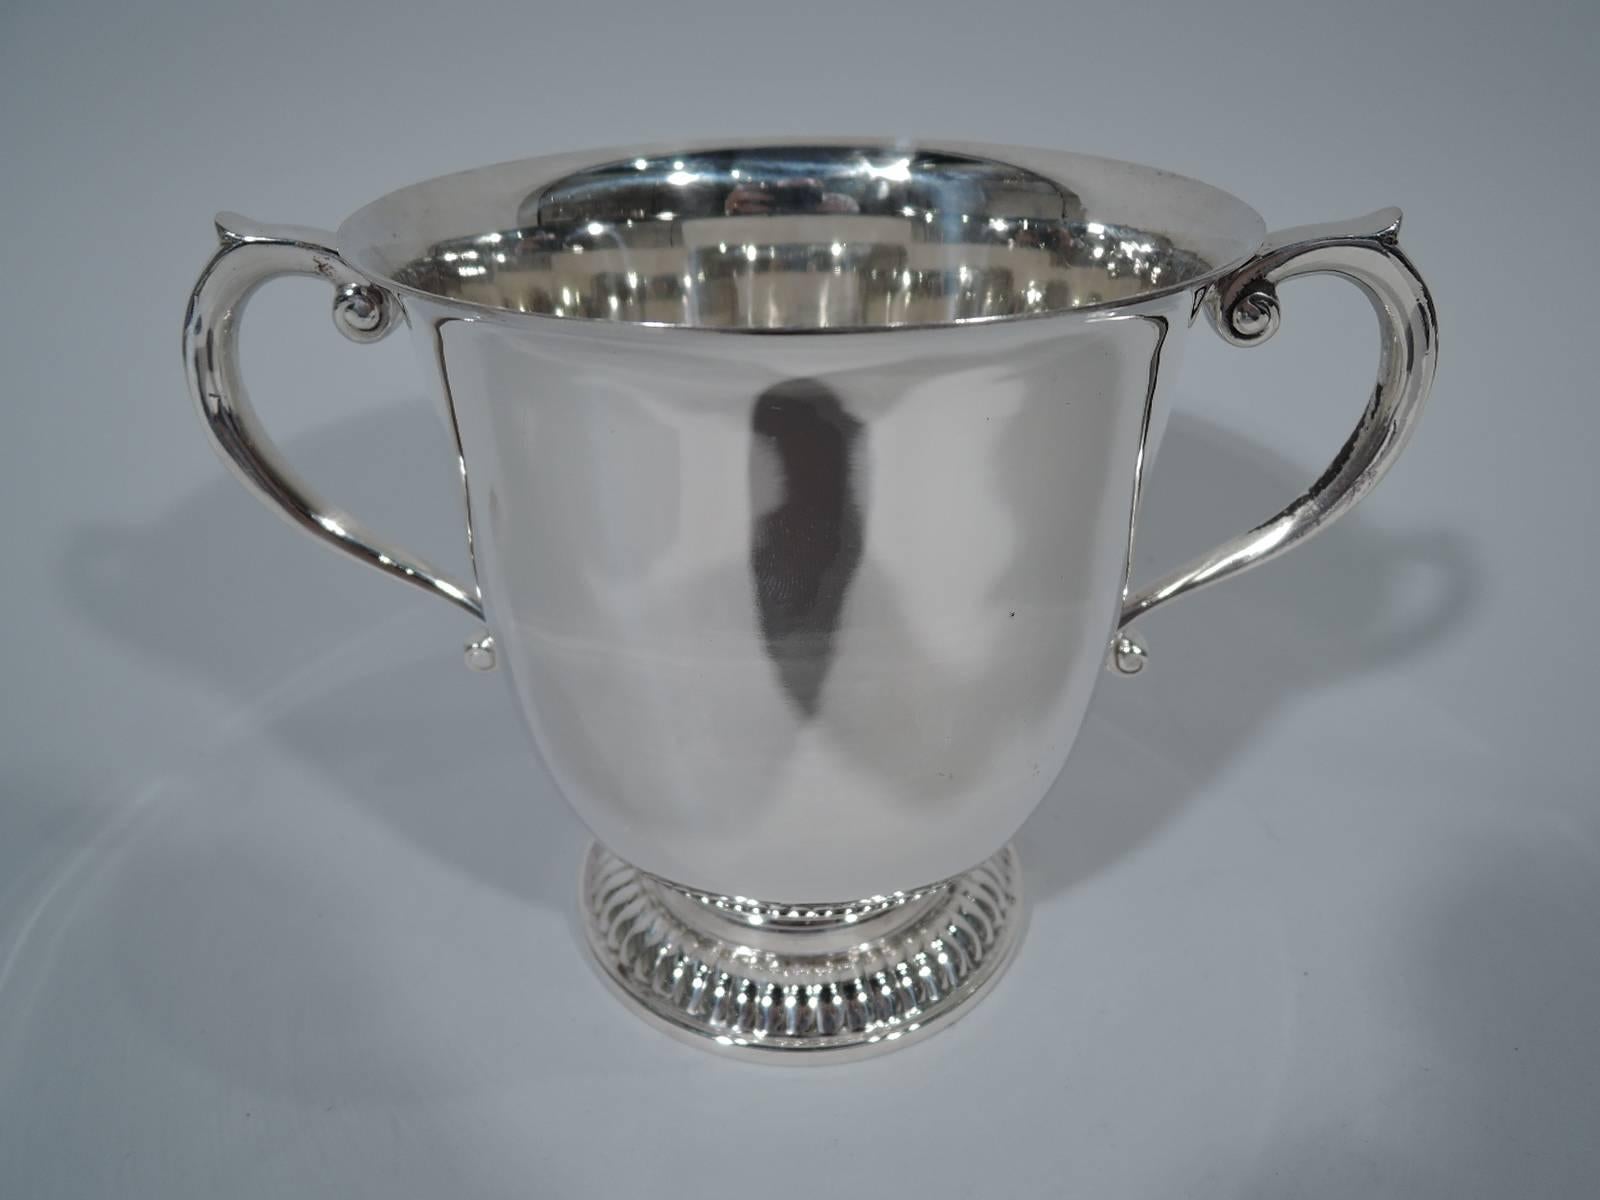 Classic sterling silver trophy cup. Made by Tiffany & Co. in New York, circa 1965. Urn with flared rim, capped scroll side handles, and raised and gadrooned foot. Compact with good heft and lots of room for engraving. Hallmarked. Heavy weight: 20